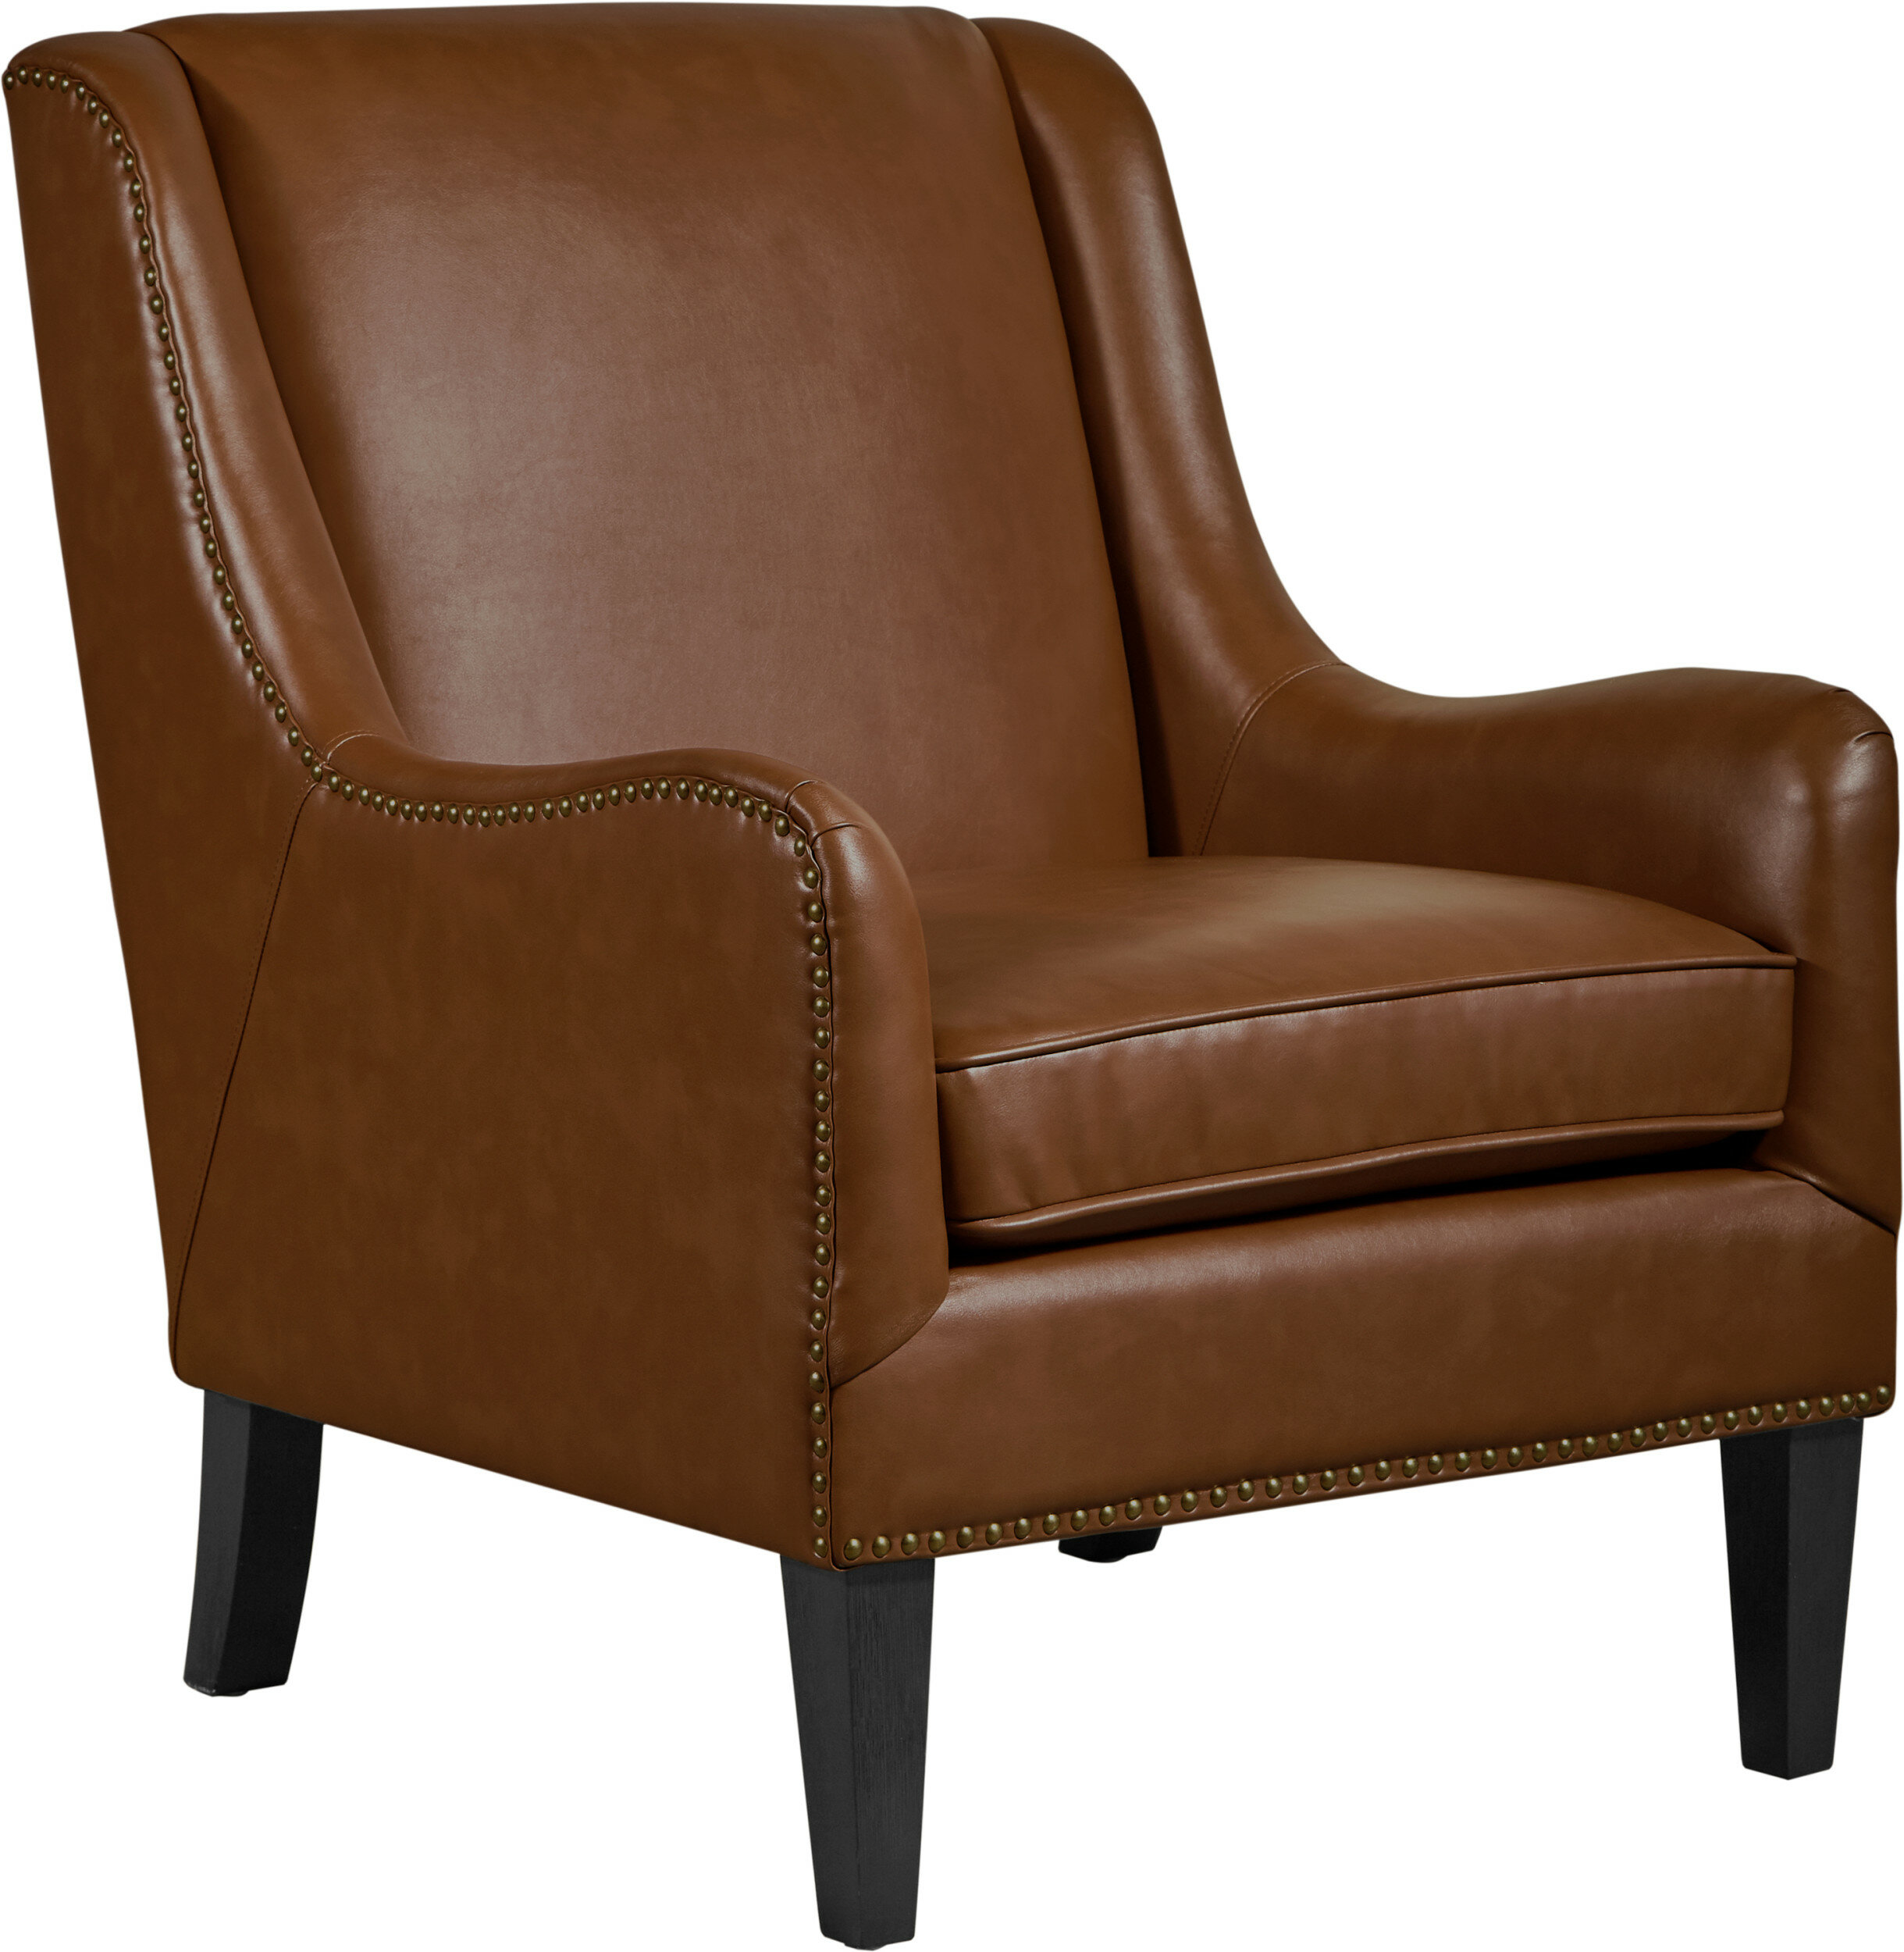 Resonate Serrated Stedord Tommy Hilfiger Andover Leather Accent Chair & Reviews | Wayfair